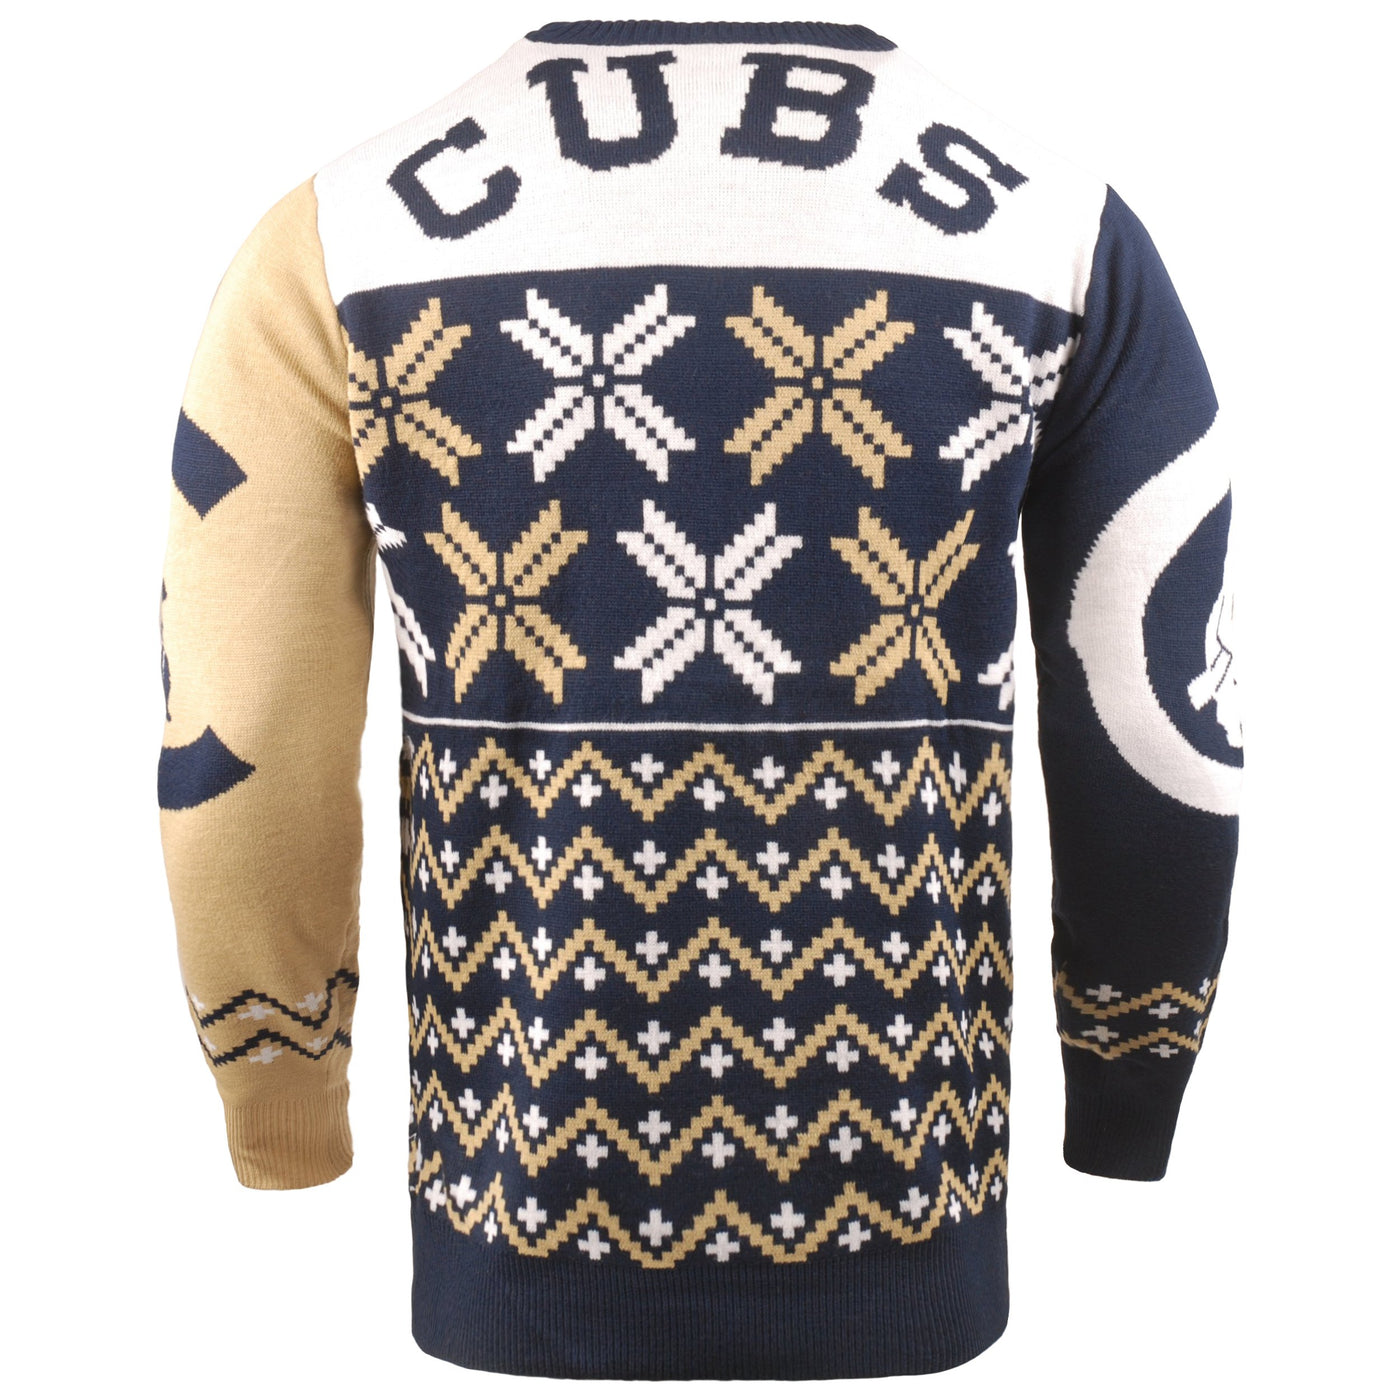 1914 HOLIDAY CHICAGO CUBS UGLY SWEATER - Ivy Shop